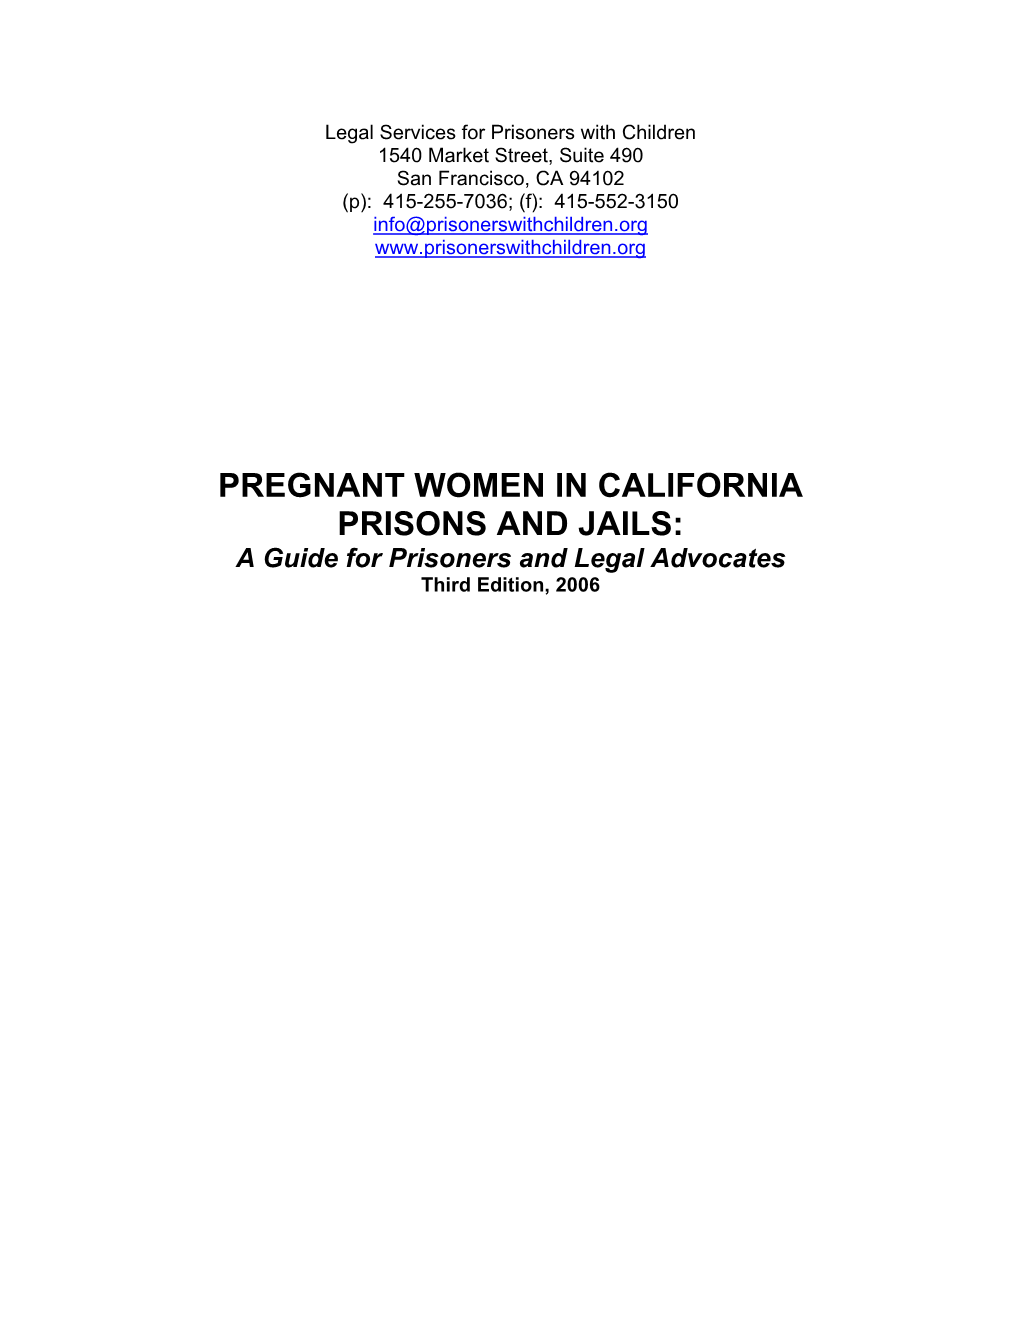 PREGNANT WOMEN in CALIFORNIA PRISONS and JAILS: a Guide for Prisoners and Legal Advocates Third Edition, 2006